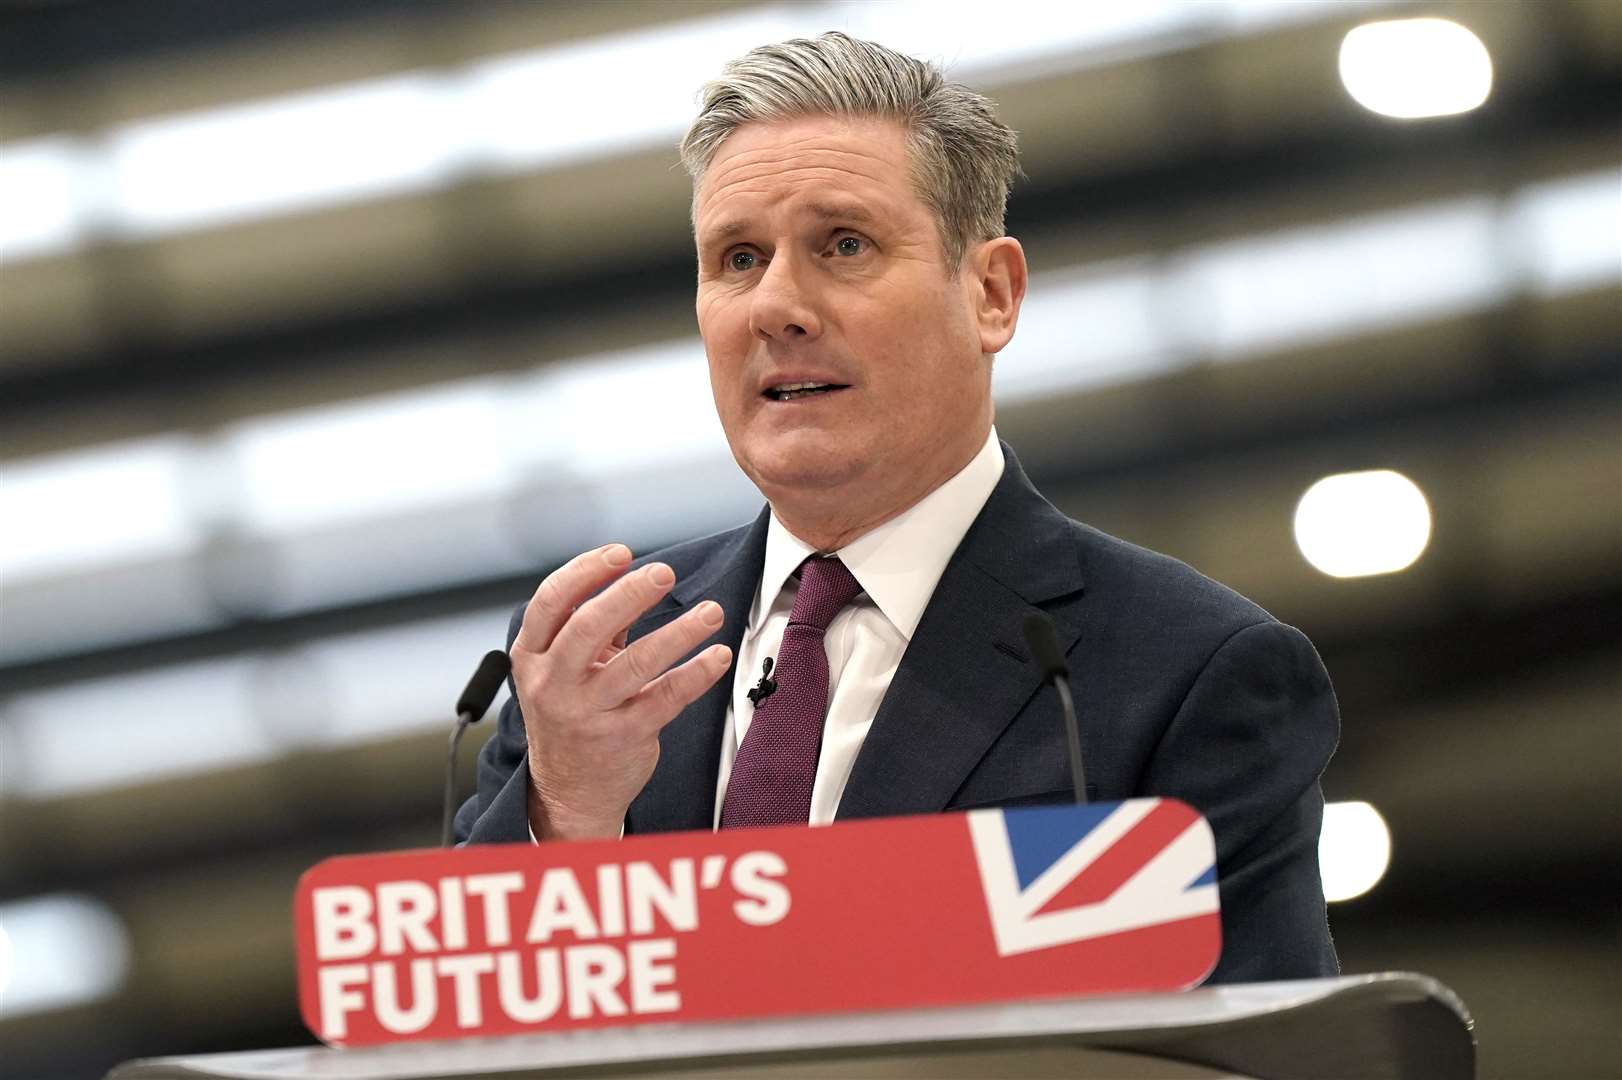 The poll did not provide universal good news for Labour either as only 30% of people said they thought they would be better off if Sir Keir Starmer’s party won the next election (Jacob King/PA)